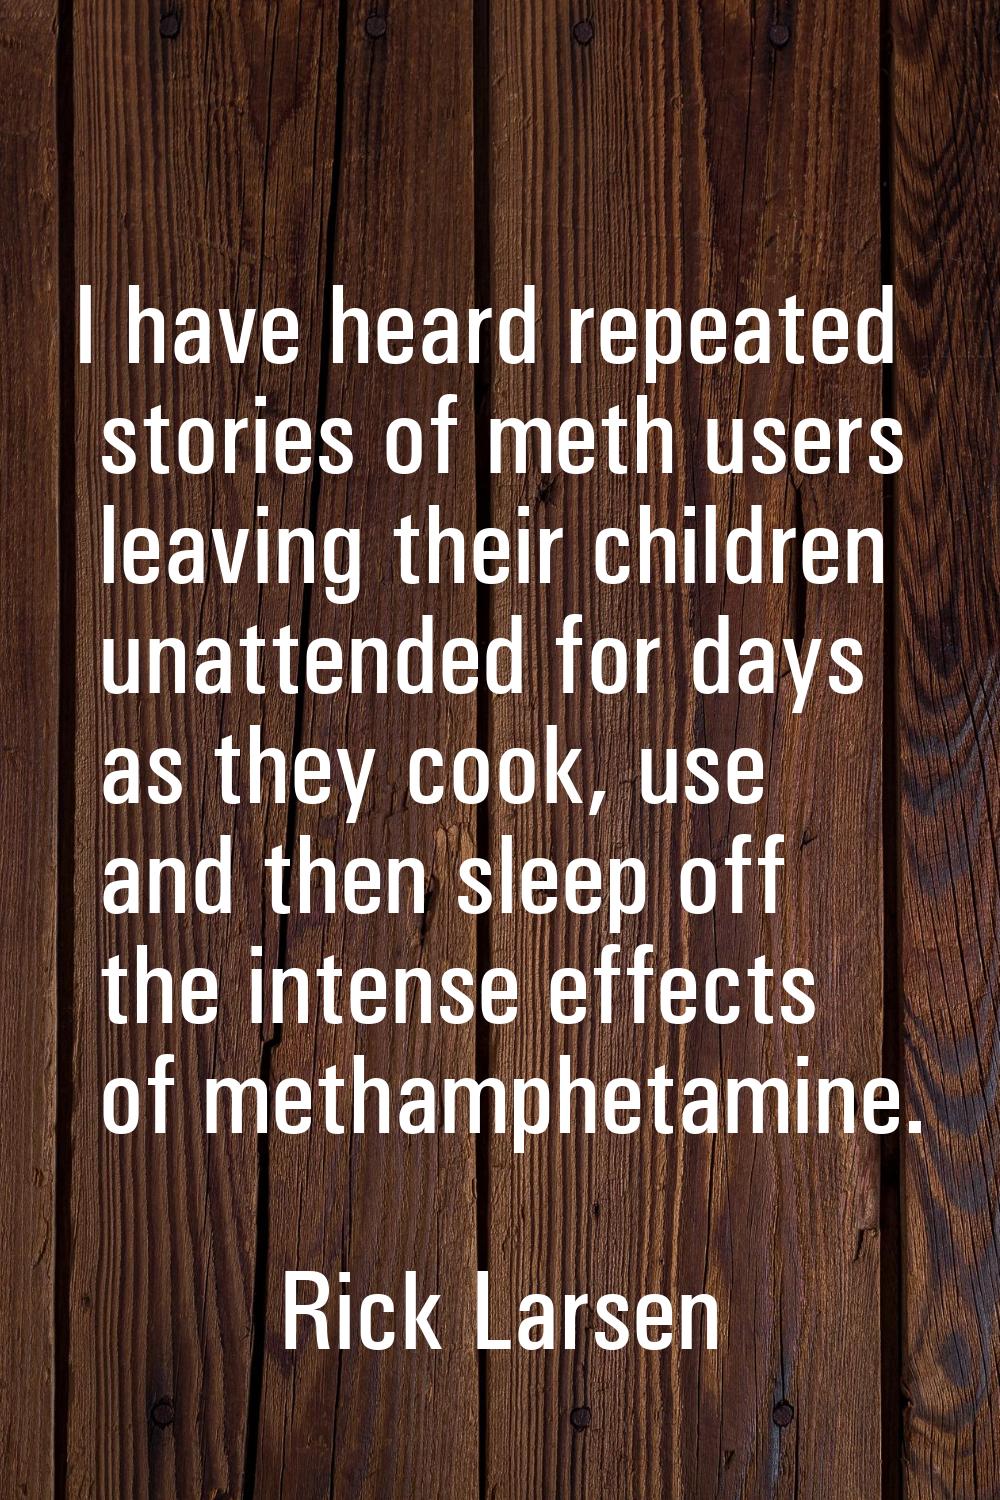 I have heard repeated stories of meth users leaving their children unattended for days as they cook